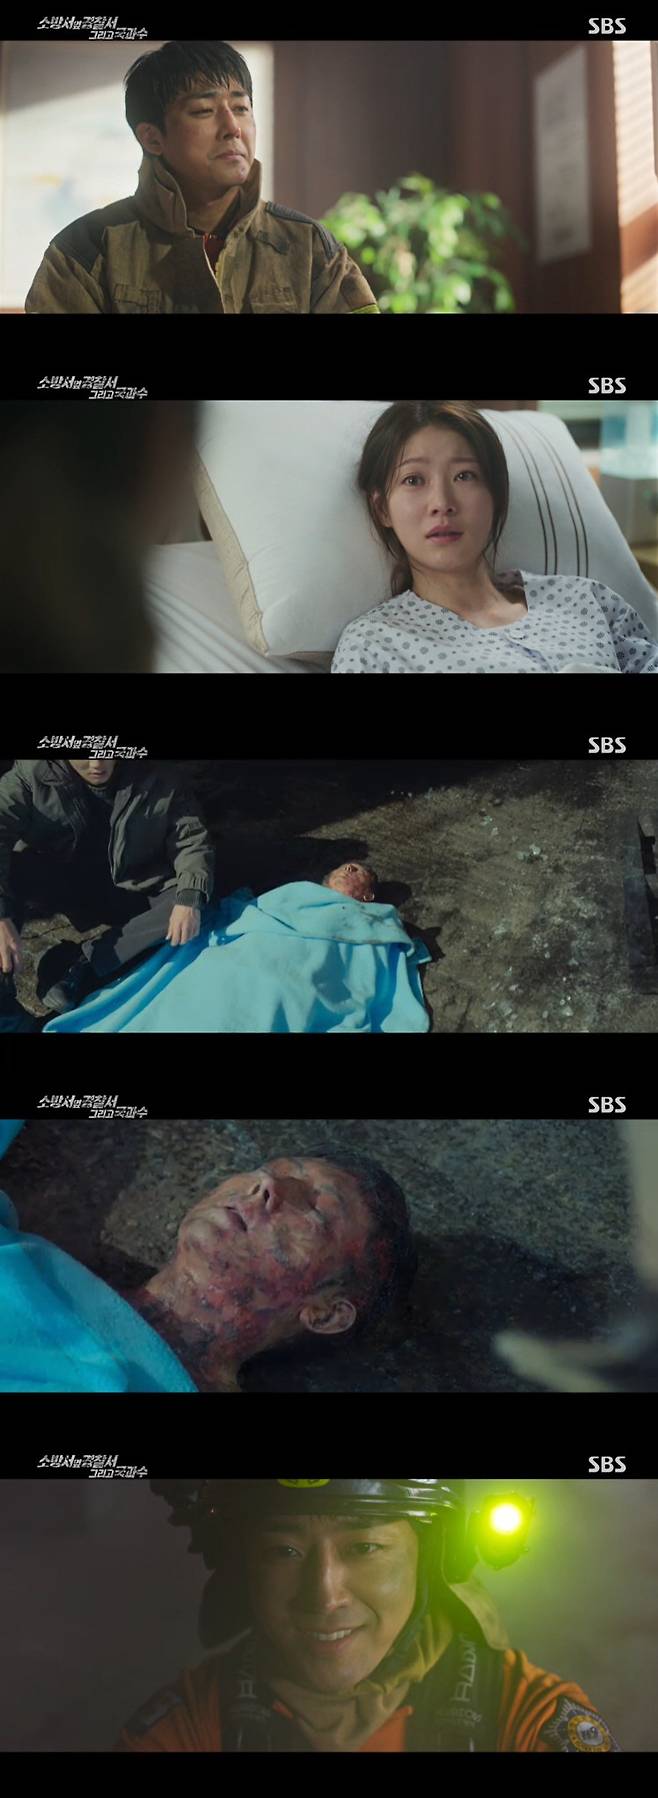 Small side 2 Son ho joon was shocked by the discovery of a cold body.The SBS Friday-Saturday drama The police station next to the fire station a, which aired on 11th, featured Qin Hao dog (Kim Rae-won) digging into The Texas Chainsaw Massacre: The Beginning arson case.Bong Do-jin (Son ho joon) gave a proposal ring to Tongue-in-cheek (Gong Seung-yeon), who woke up.If you can not get out, you will not see you. Thats scary, he confessed to tongue-in-cheek.In a tongue-in-cheek Why do you make such a strange sound, Bongdojin shed tears, saying, Do not cry too much.Since then, Bong Do-jin has been found dead with a cold corpse, while his Qin Hao dog, the Fire Station family, and his younger brother Bong An-na (played by Ji-woo) all sobbed.A fellow firefighter said, I went in alone when I heard that there was a child (Bong Do-jin) who couldnt come inside.After the death of Bongdo Jin, Qin Hao dogs and police officers began to dig into the incident with poison.